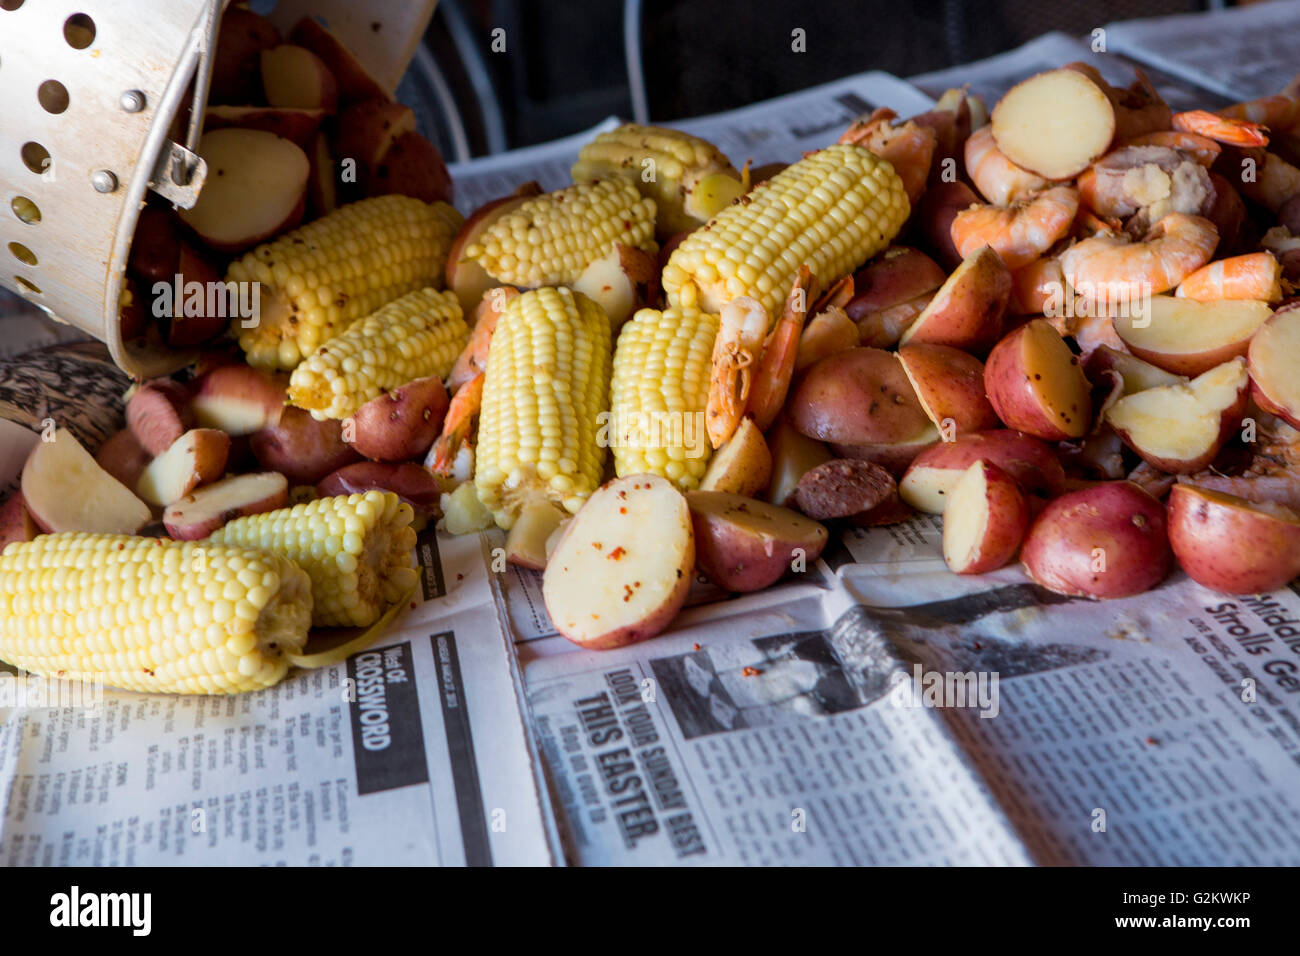 Low Country Boil with Shrimp, Corn, Sausage and Potatoes Being  Poured on Newspaper Stock Photo